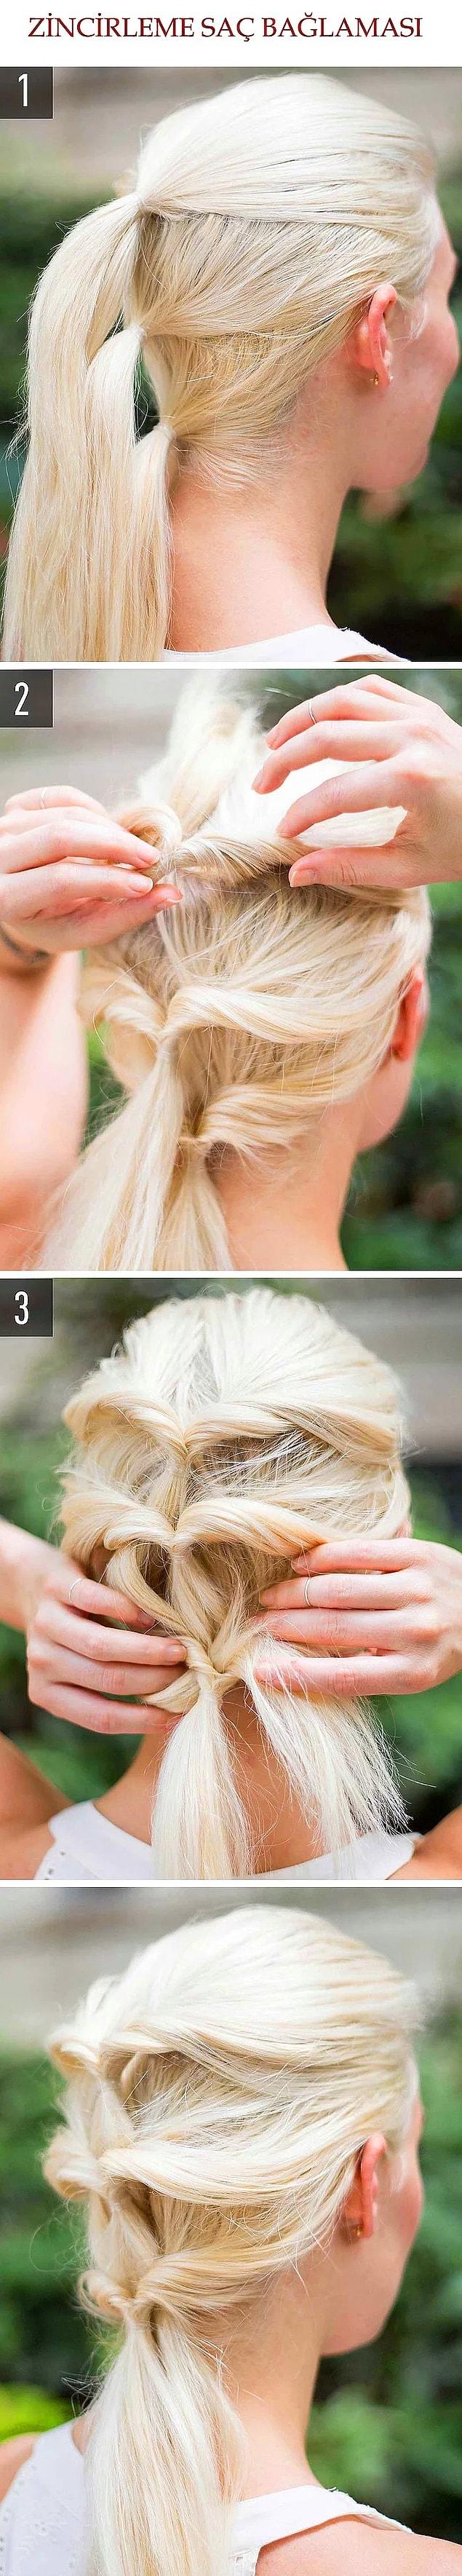 21. Make small ponytails along the same line, depending on how long and thick your hair is. Split the top of the ponytail in the middle, reverse the ponytail into the split. Put the ponytails in each other starting from the top. Don't forget to enjoy your cool hairdo.